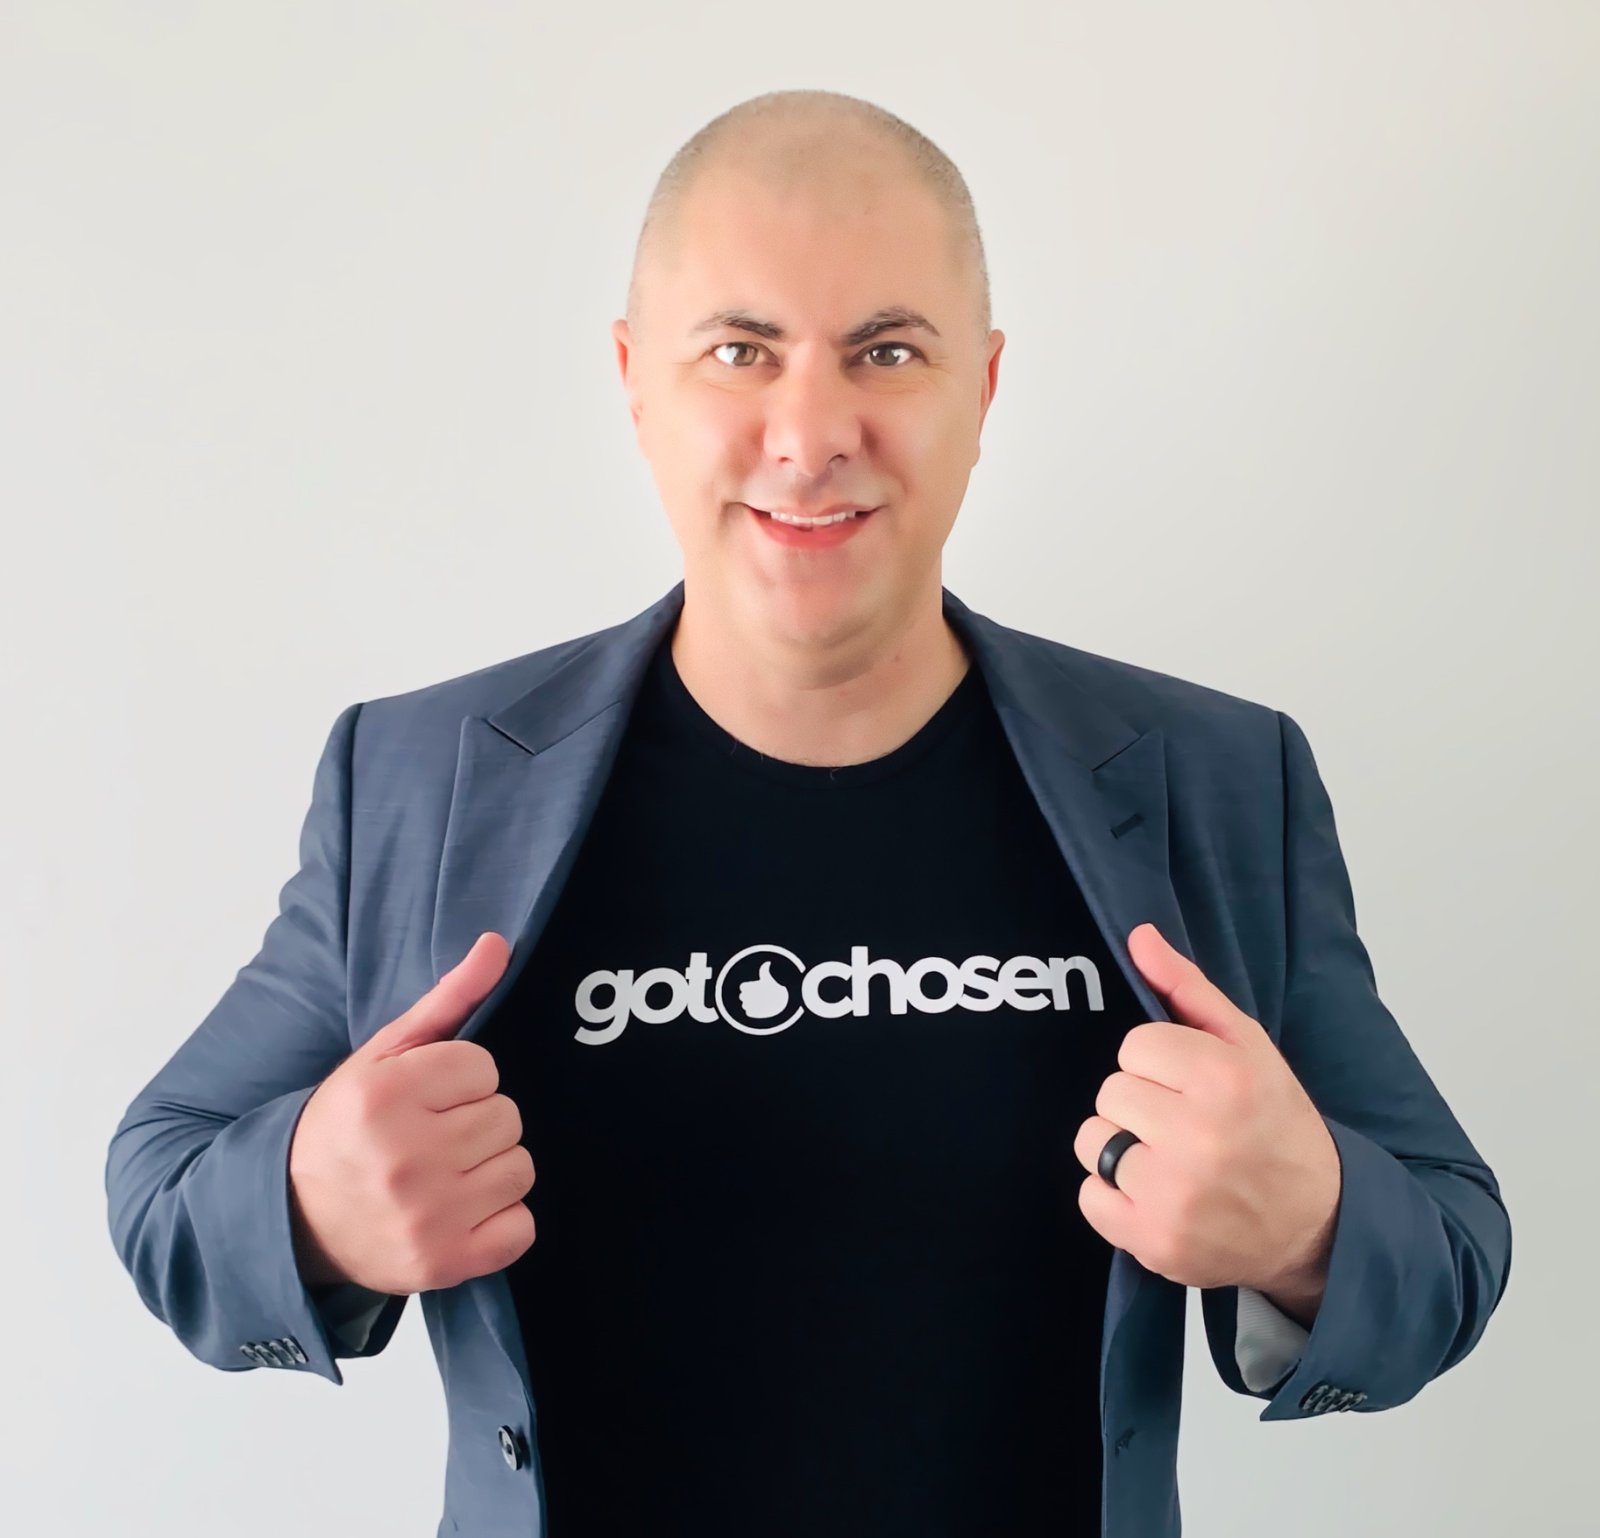 Social Media Platform ‘GotChosen’ Unveils Exciting New Season of Contests: A Chance to Shine and Win Big!